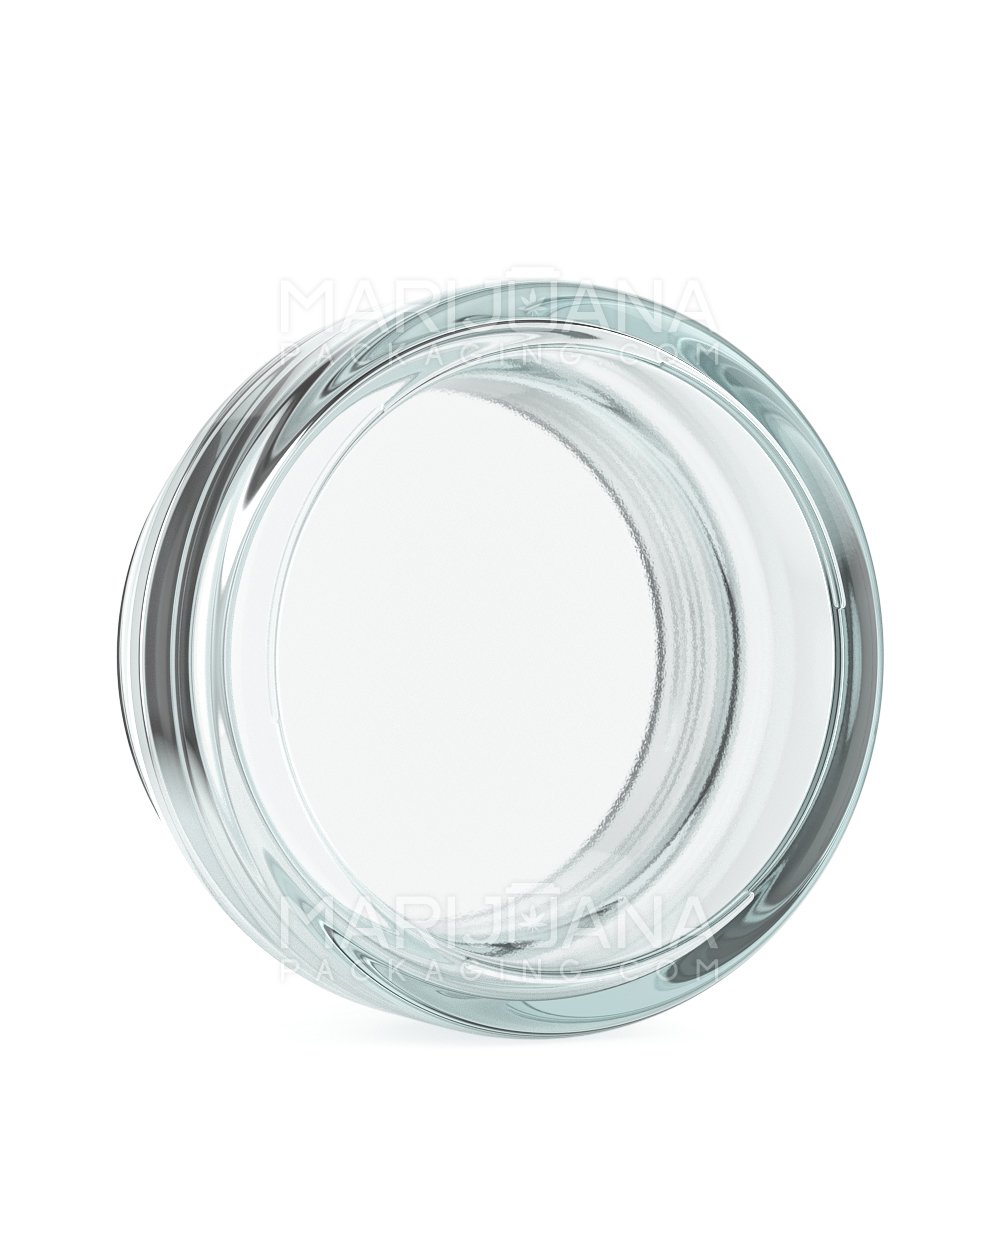 Straight Sided Clear Glass Jars | 63mm - 1.7oz - 96 Count - 4